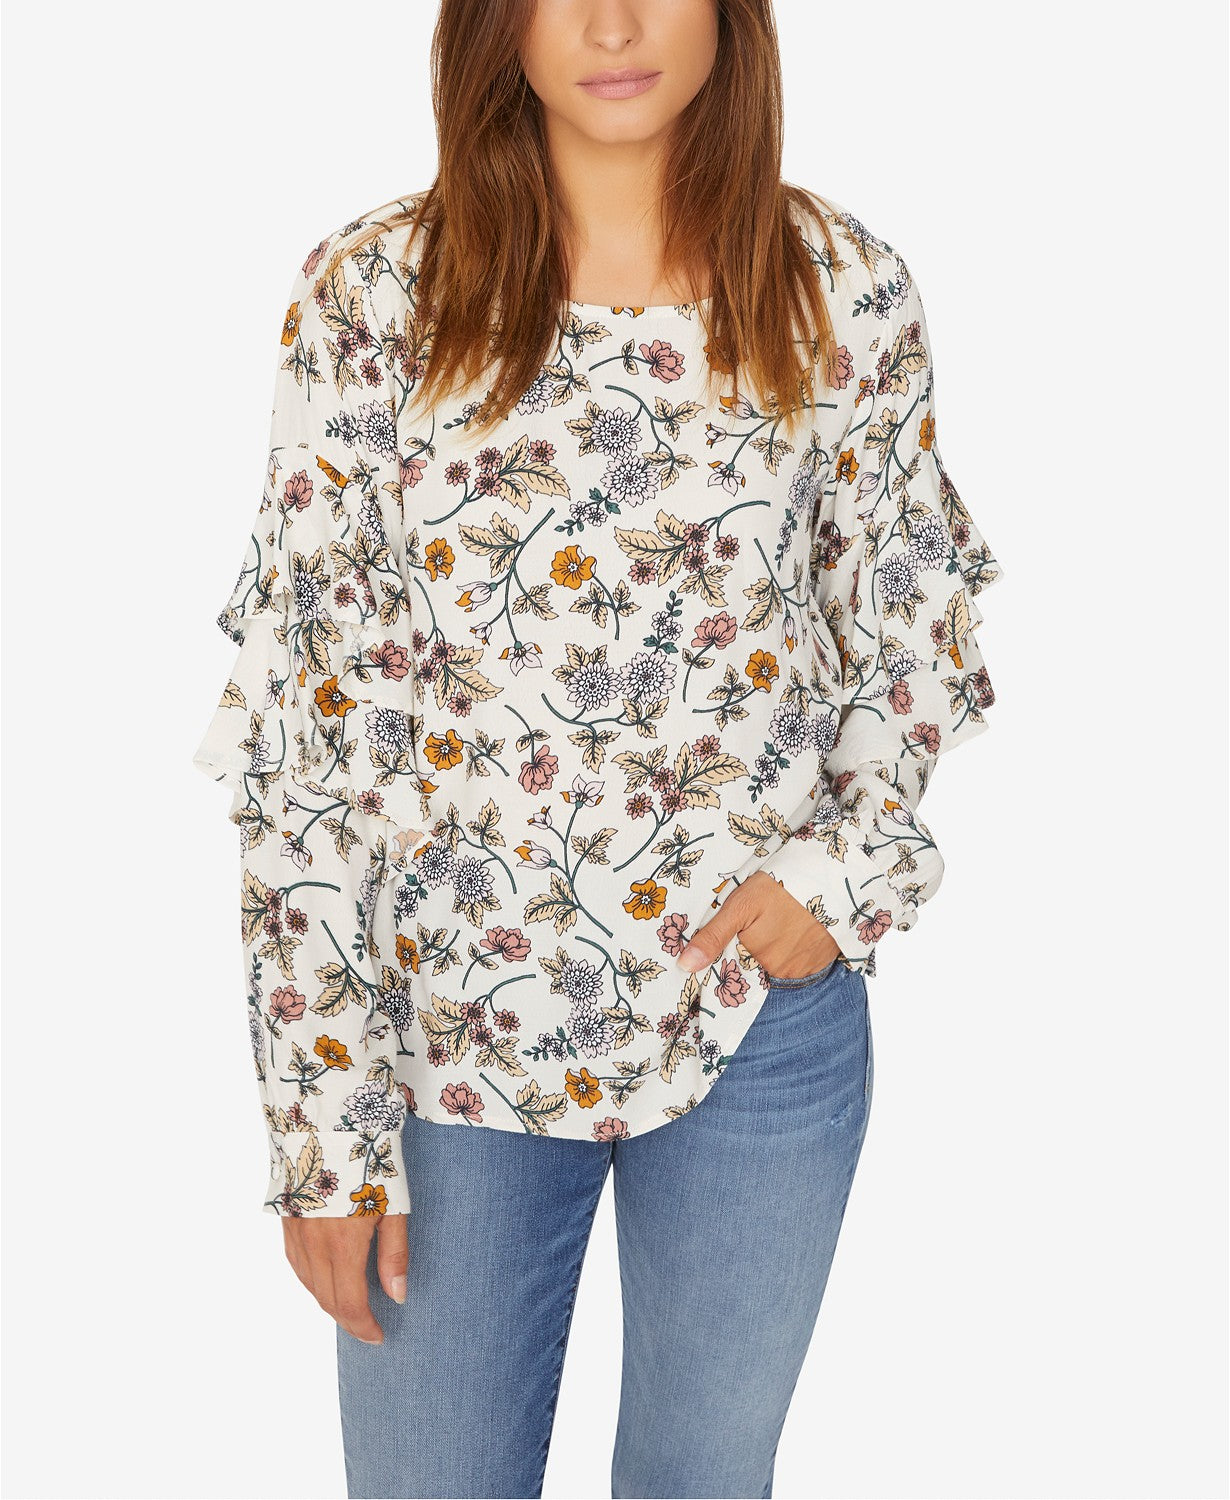 Sanctuary Tilly Ruffled Printed Top